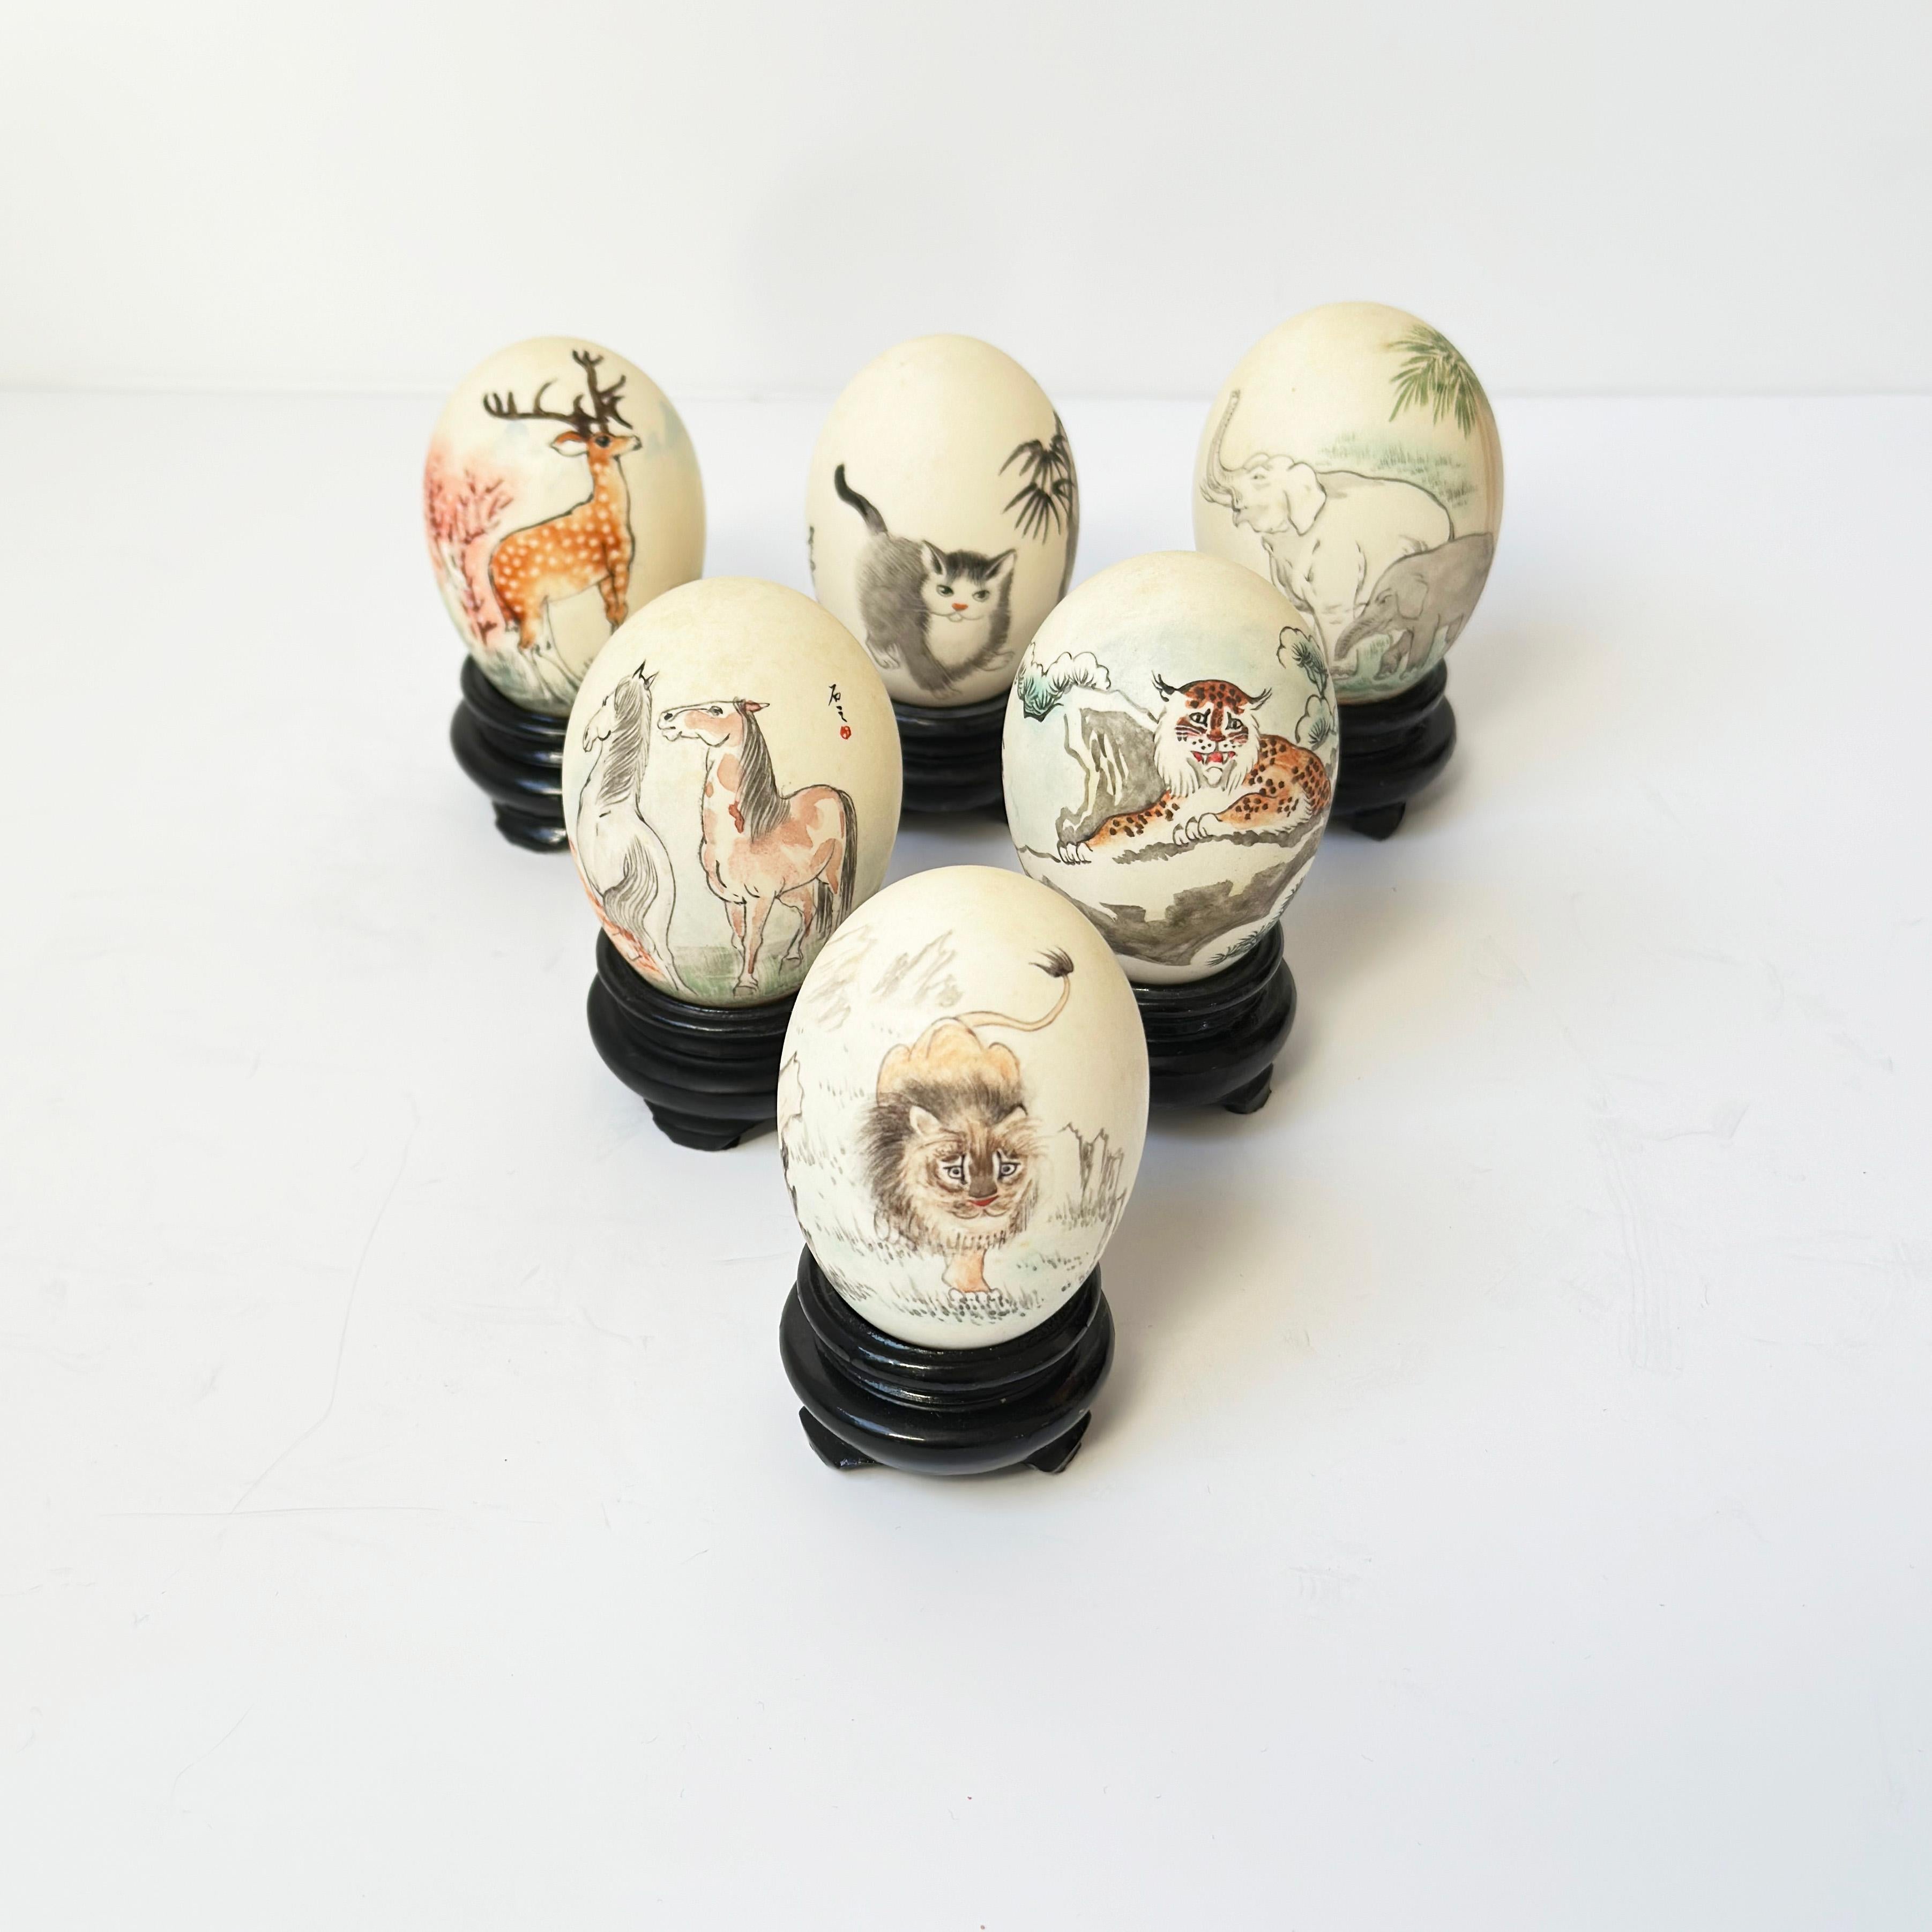 Late 20th Century Vintage Chinese Painted Eggshells on Wooden Display Plinths - Set of 6